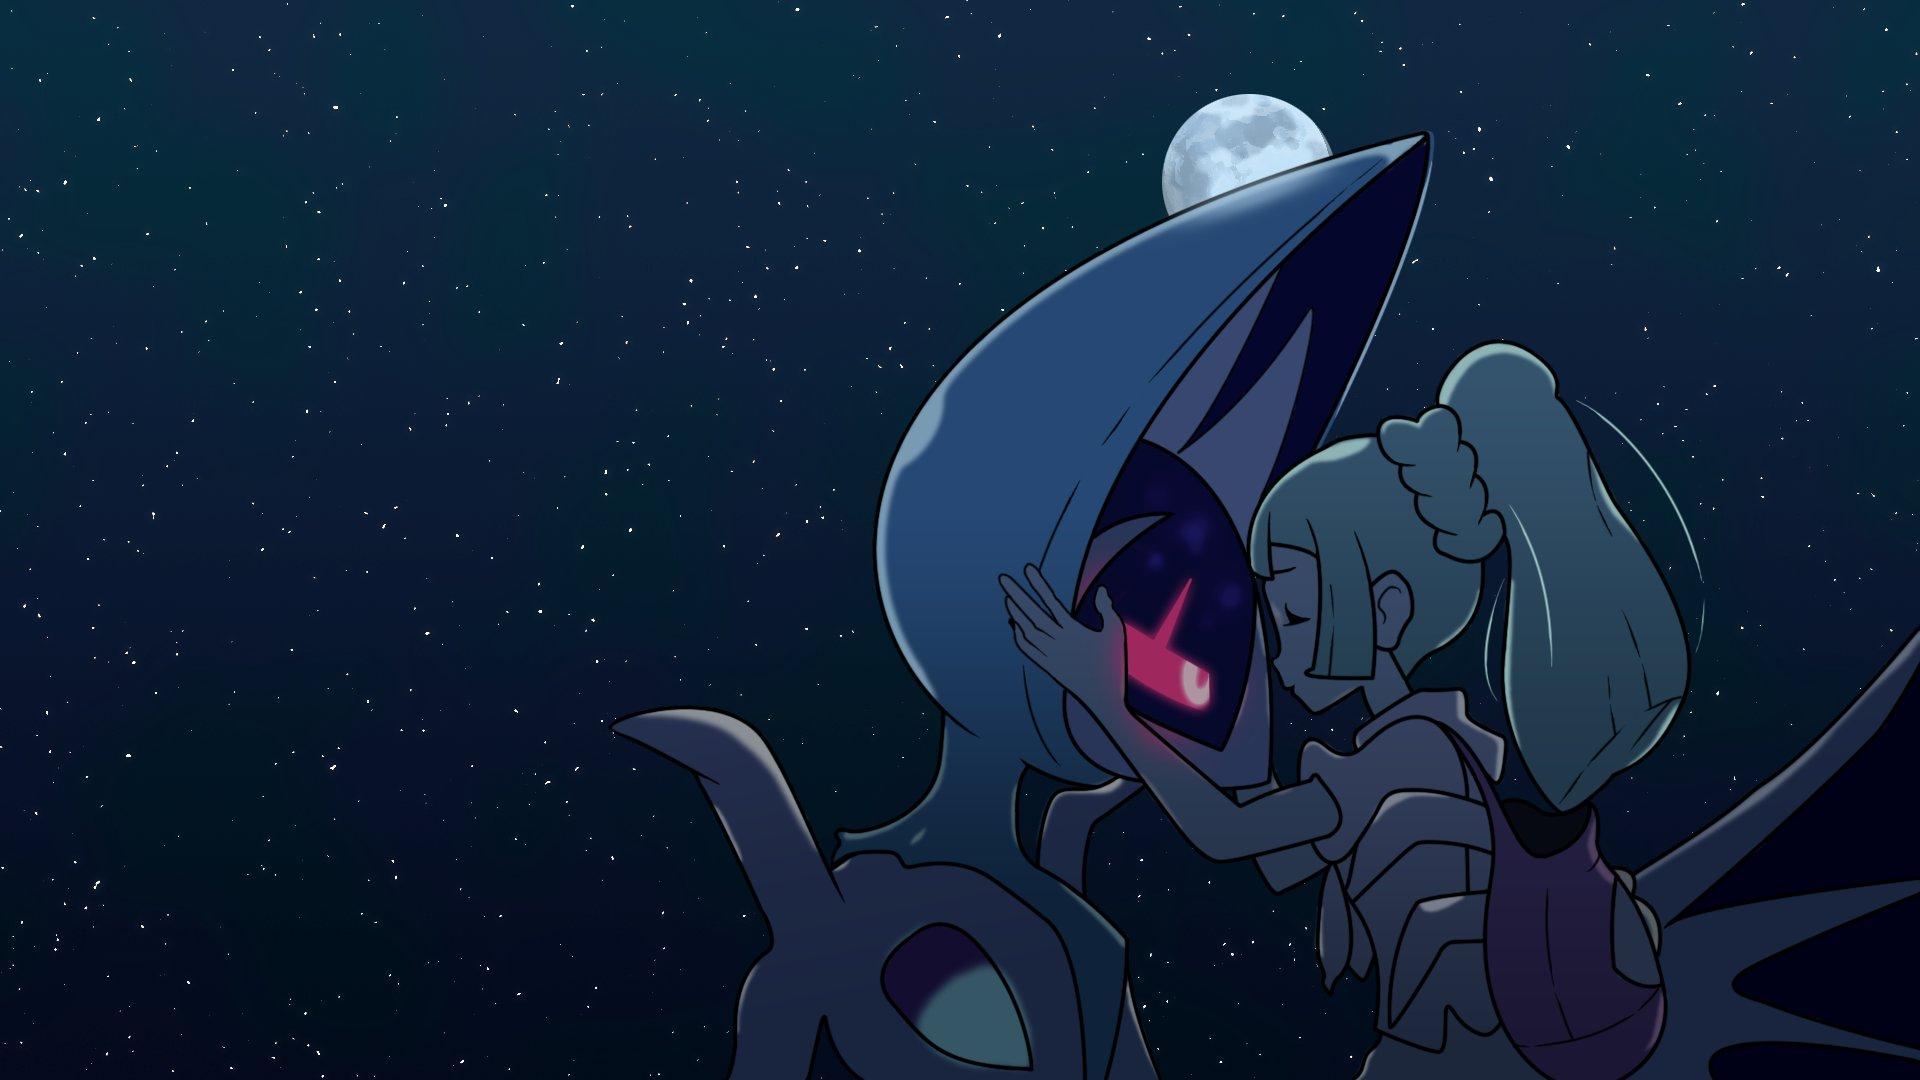 I recreated the credits image of Lillie and Lunala, and made